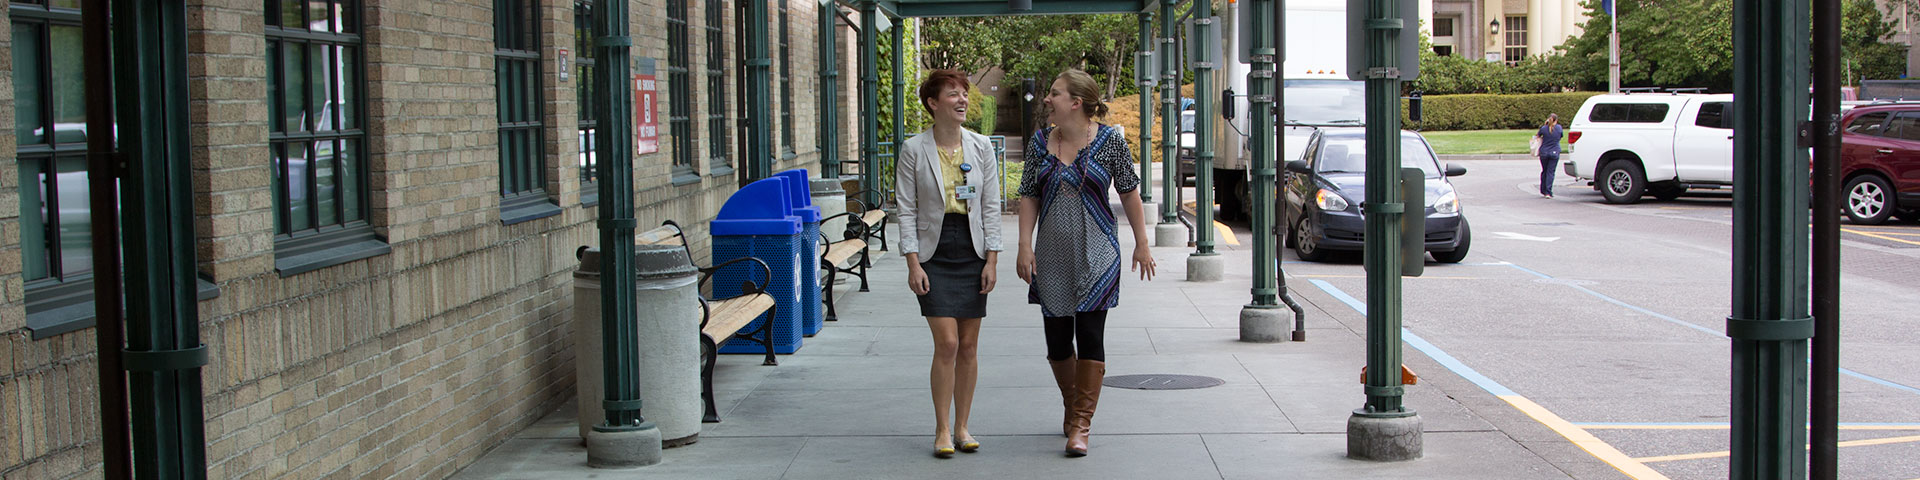 Two women walking and talking outside on campus